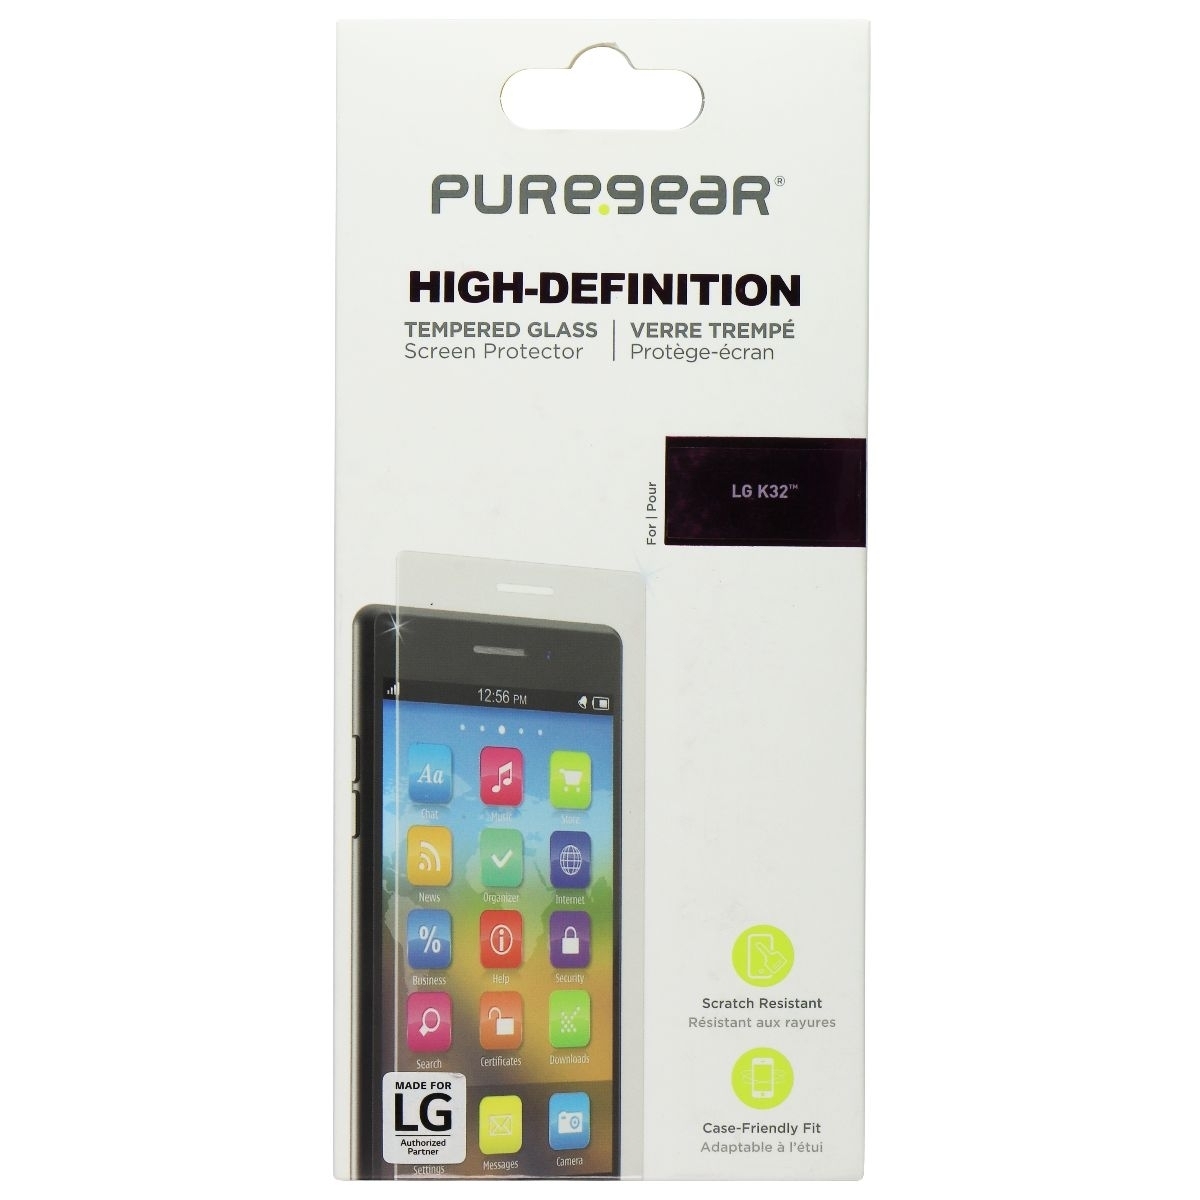 PureGear High-Definition Tempered Glass For LG K32 (2020) - Clear (Refurbished)